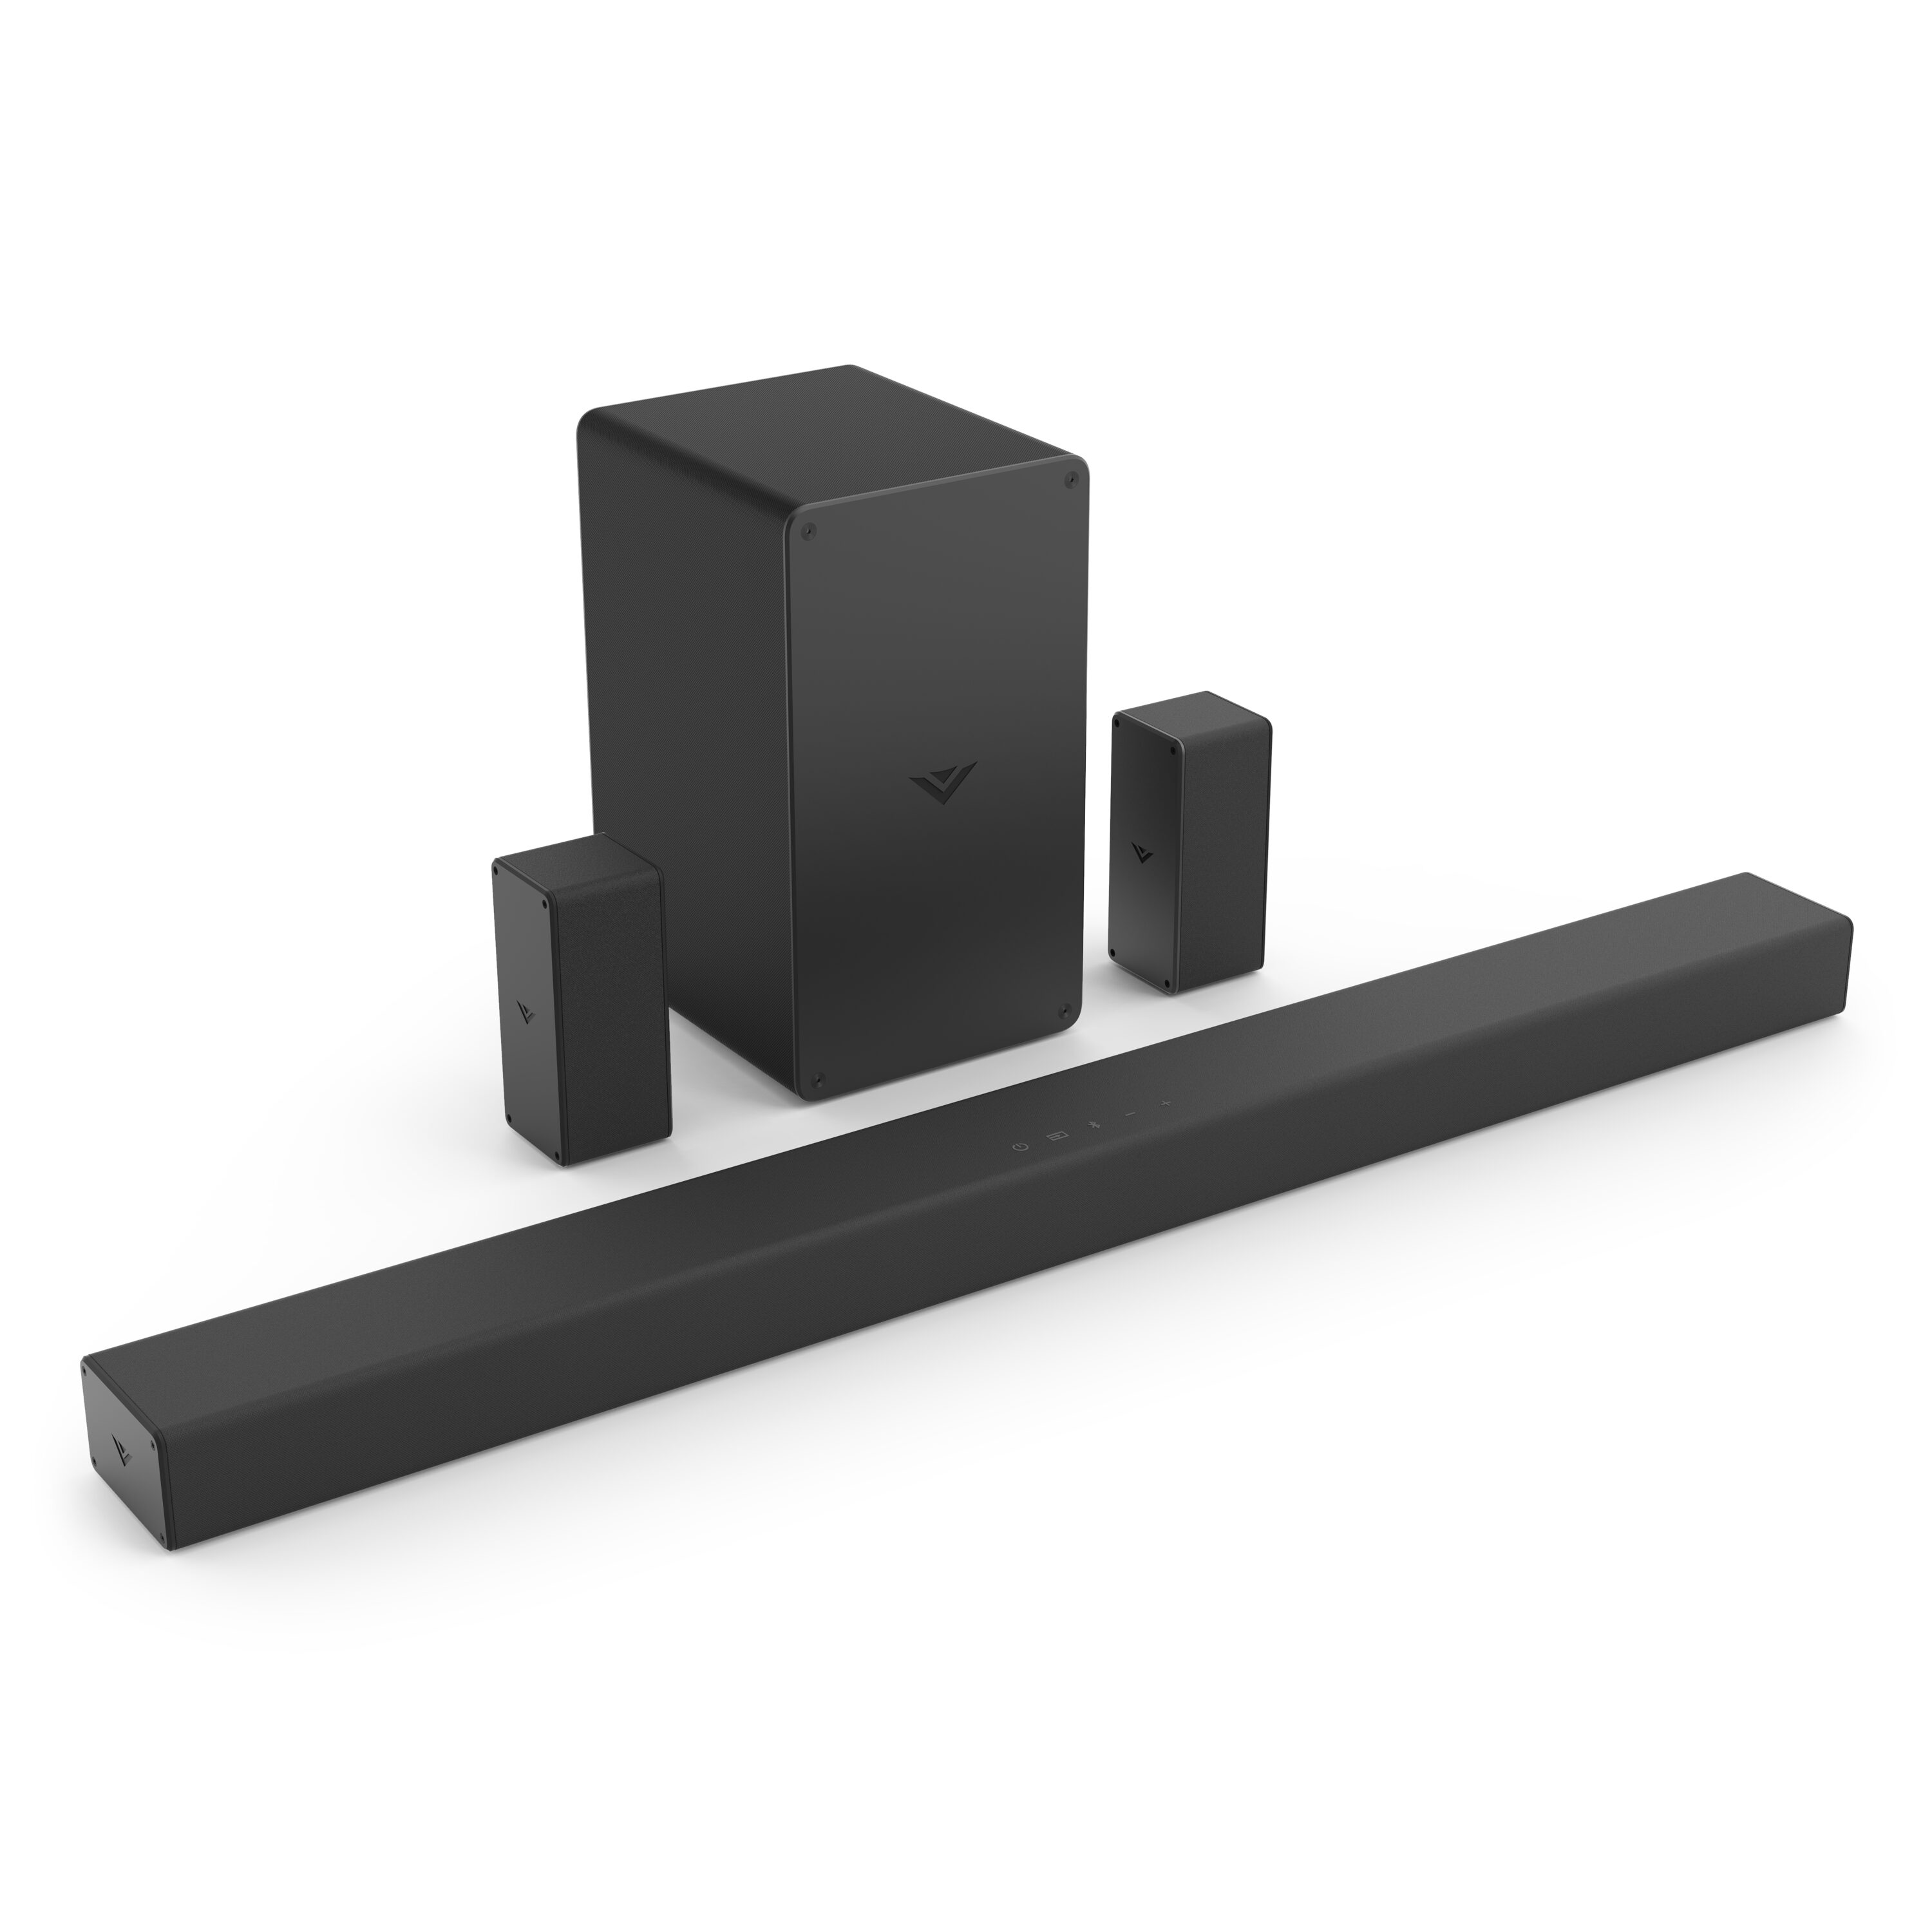 VIZIO 5.1 Home Theater Sound Bar with Bluetooth, DTS:X, Wireless Subwoofer SB3651n-H46 - image 1 of 14